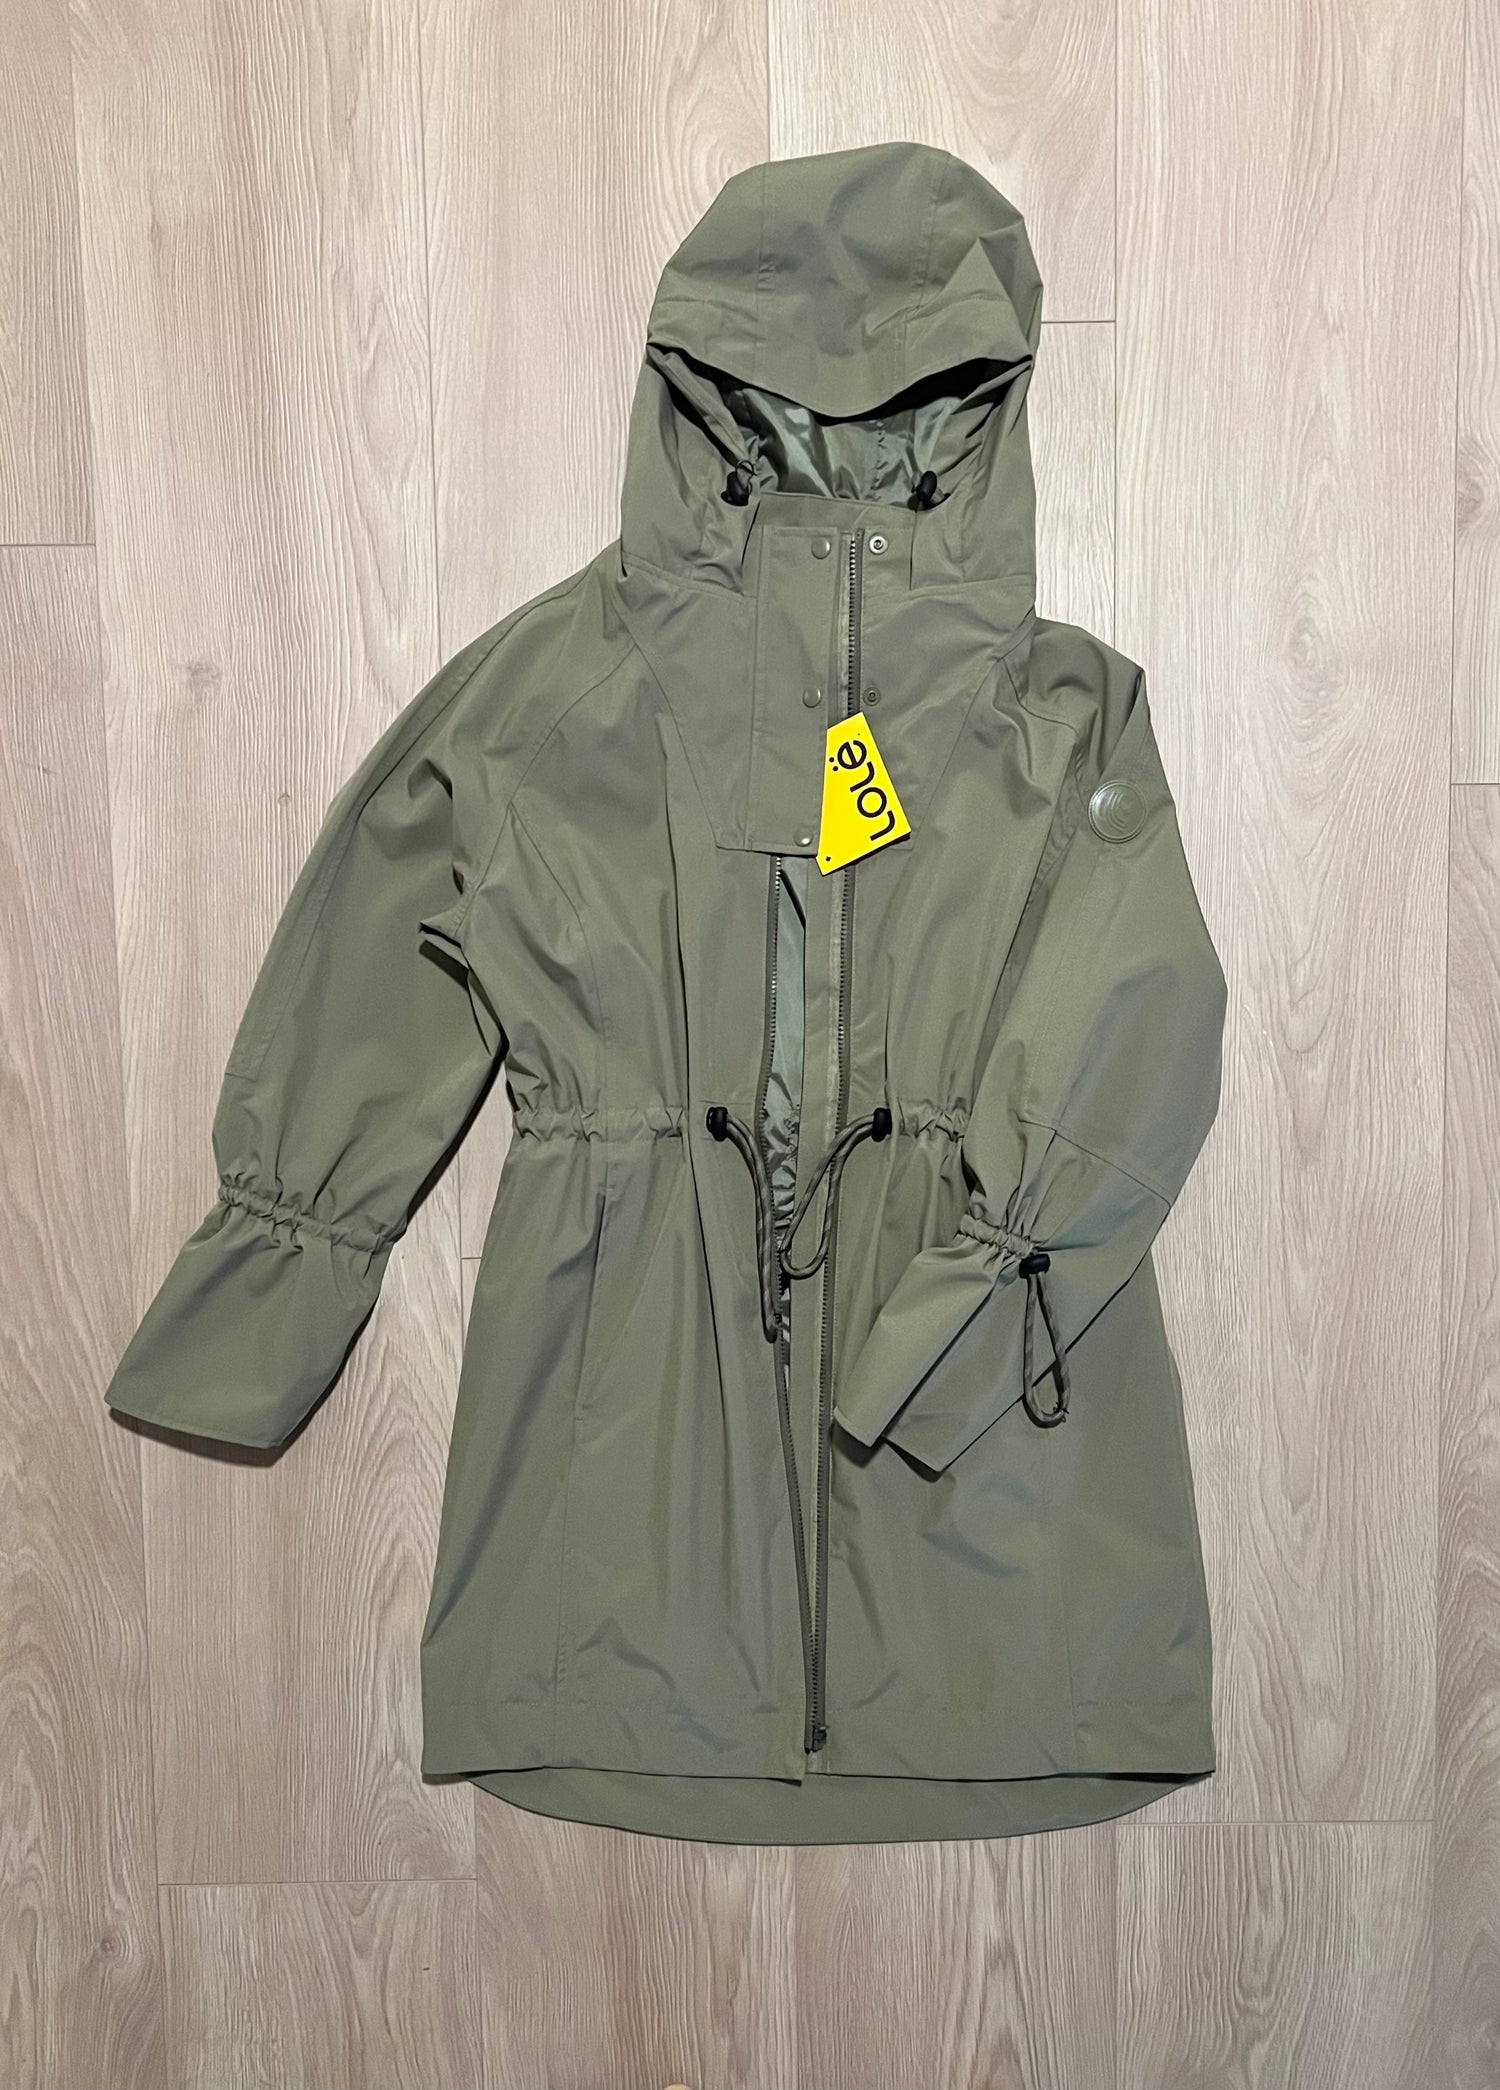 Pre owned Lole Piper Packable Rain Jacket